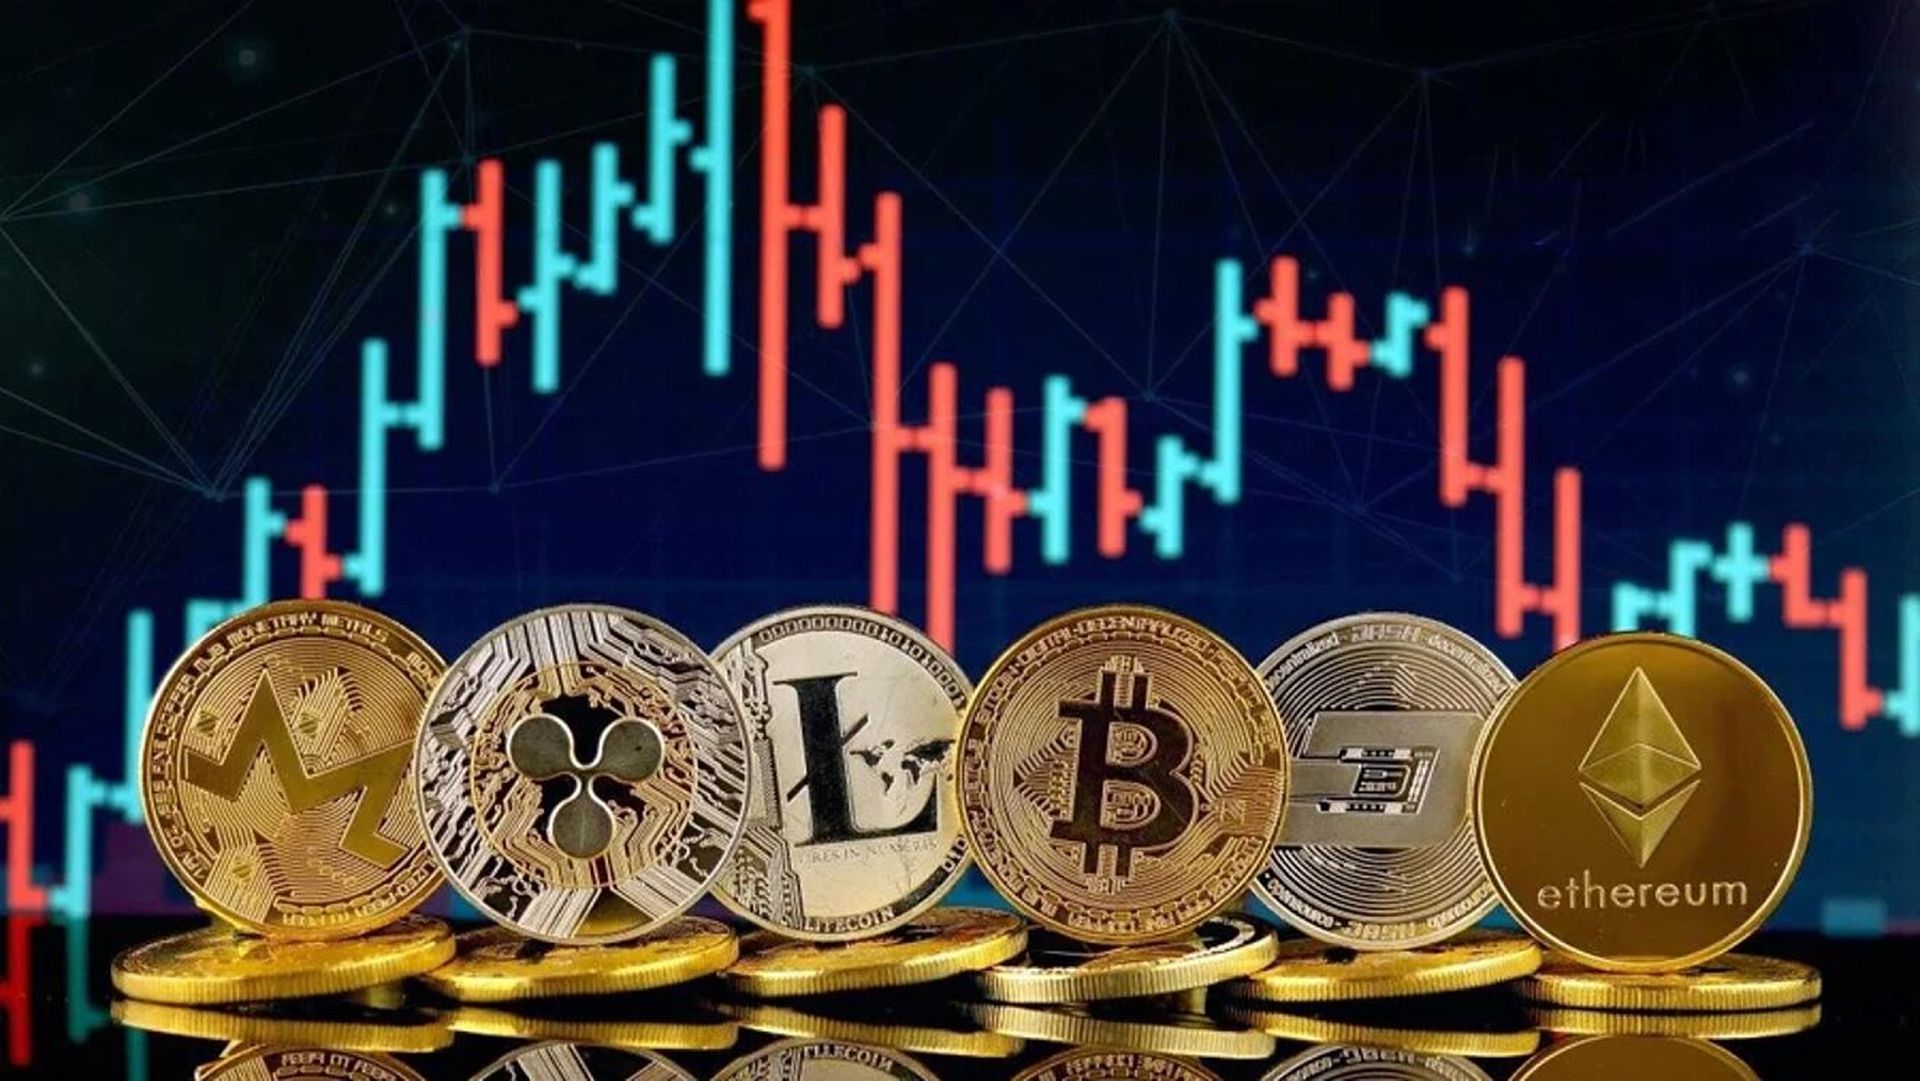 Today, we will cover the 10 best crypto interest accounts in 2022, and answer some questions like "Can I earn interest on my crypto?", "Are crypto interest...